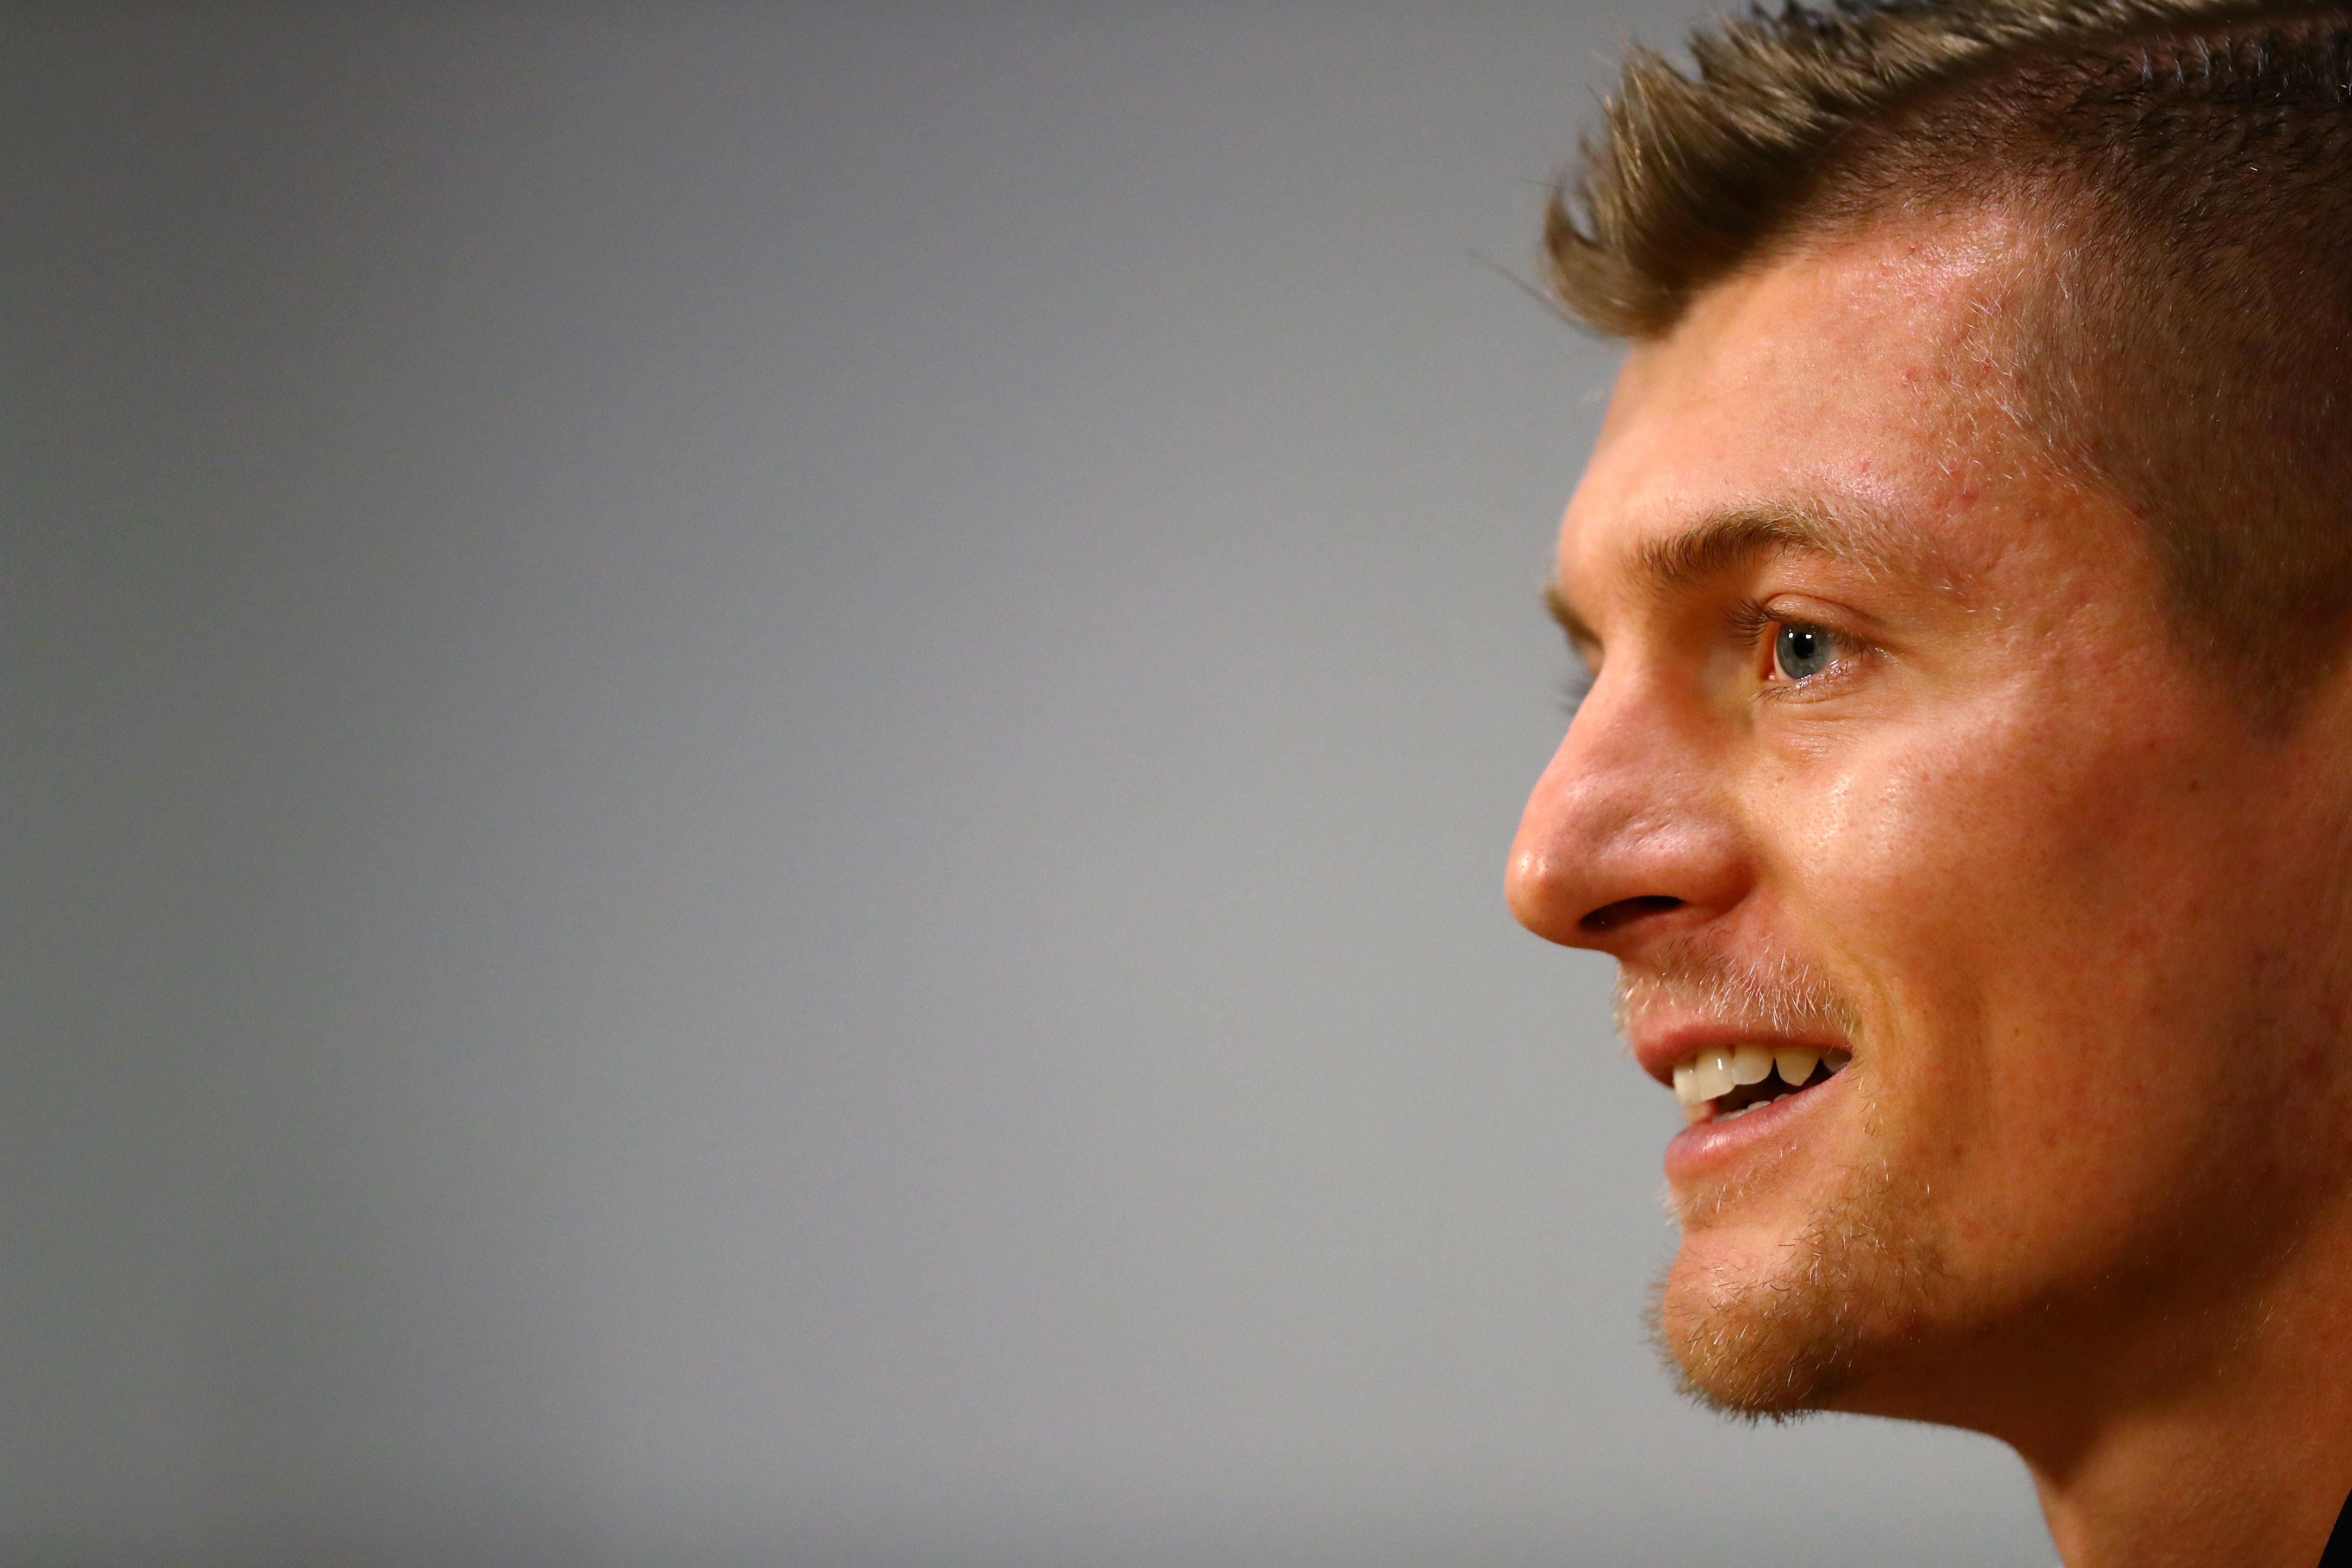 AMSTERDAM, NETHERLANDS - MARCH 23: Toni Kroos of Germany speaks to the media during a press conference ahead of their UEFA European Championship Qualifier match against the Netherlands at Johan Cruyff Arena on March 23, 2019 in Amsterdam, Netherlands. (Photo by Dean Mouhtaropoulos/Getty Images)